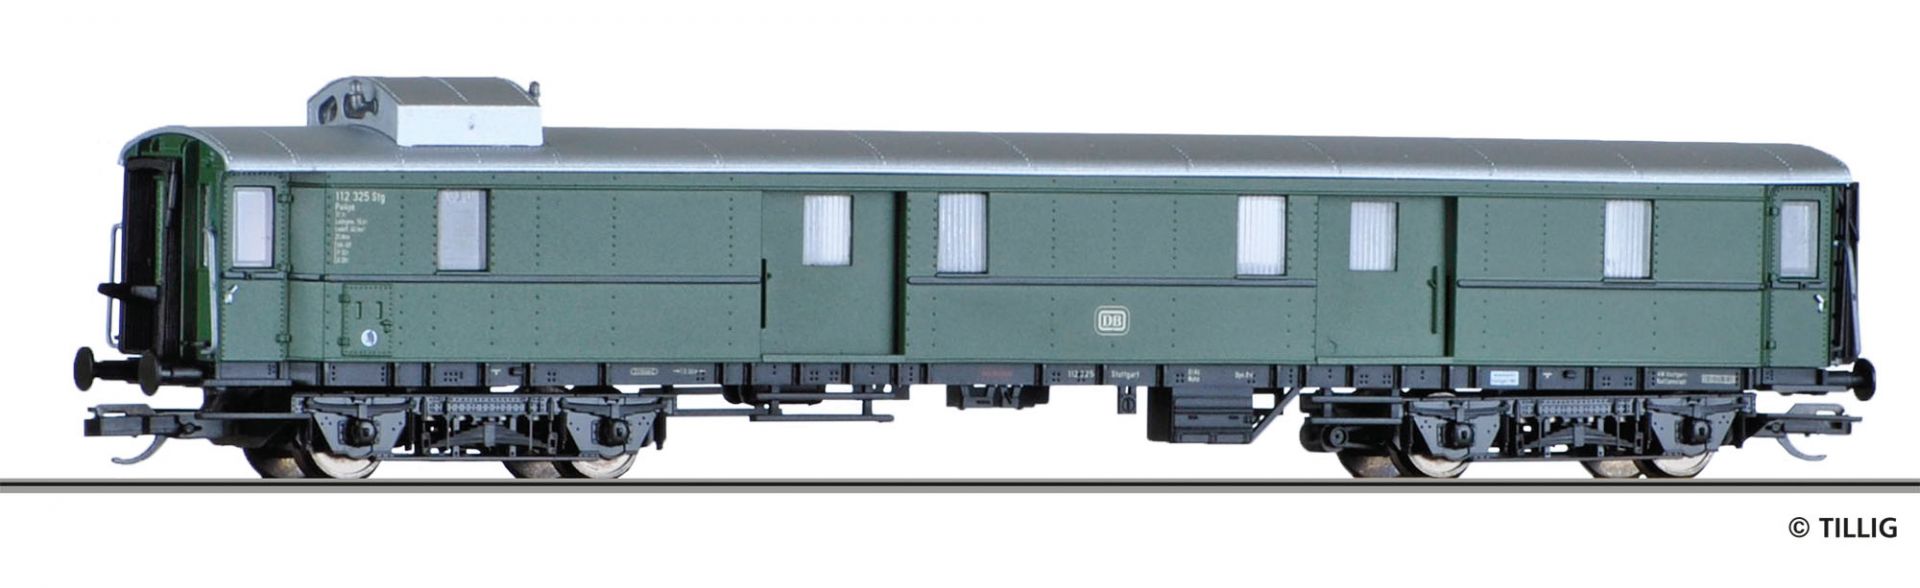 13392 | Baggage coach DB -sold out-